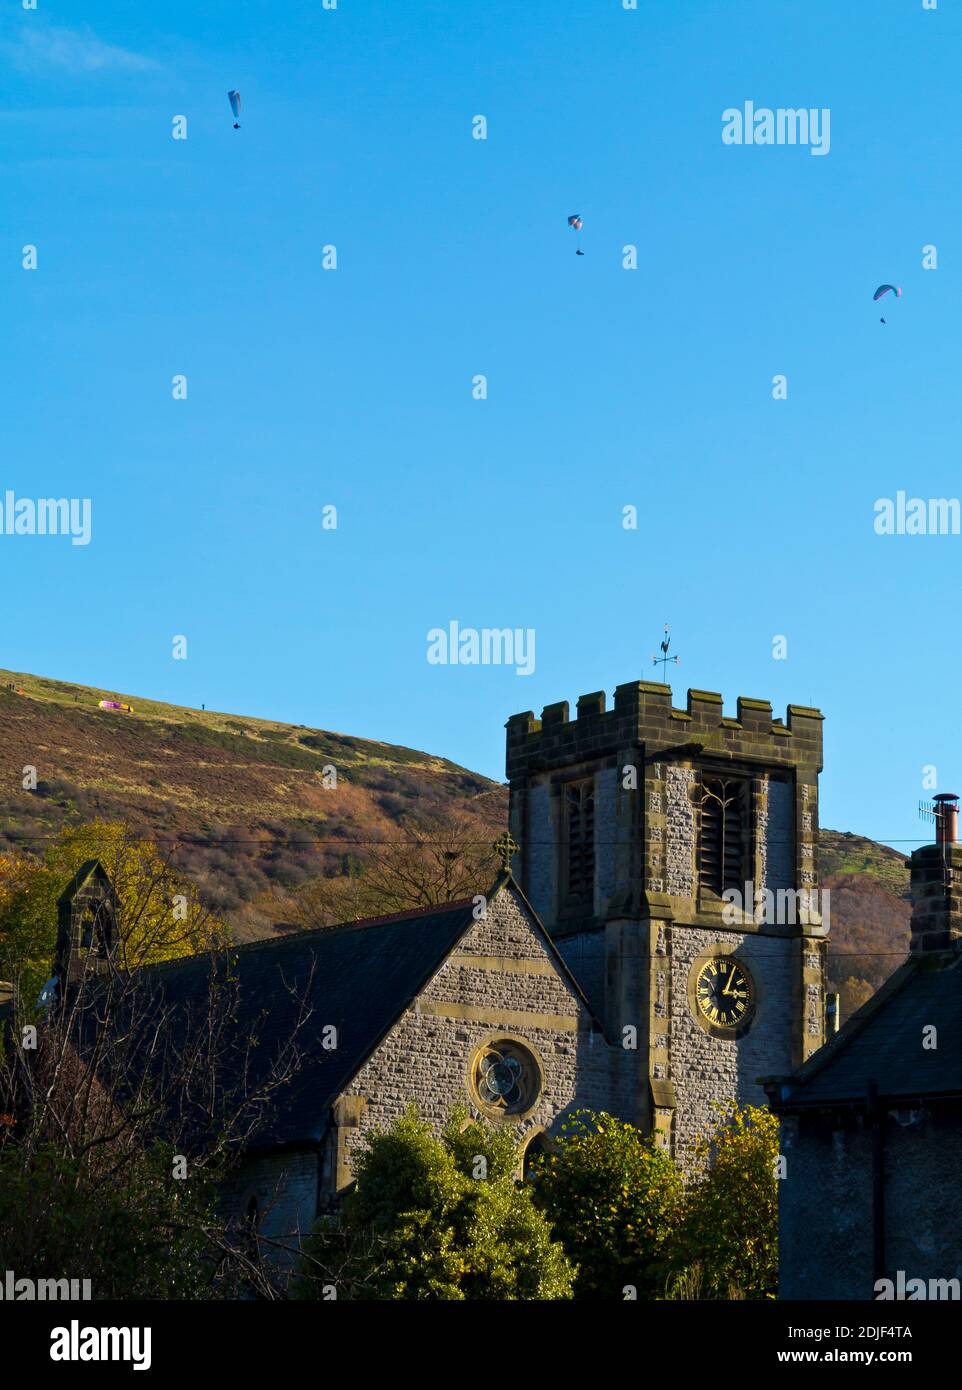 Paragliders in the sky above the Parish Church of St Barnabas in Bradwell a village in the High Peak Derbyshire England UK Stock Photo